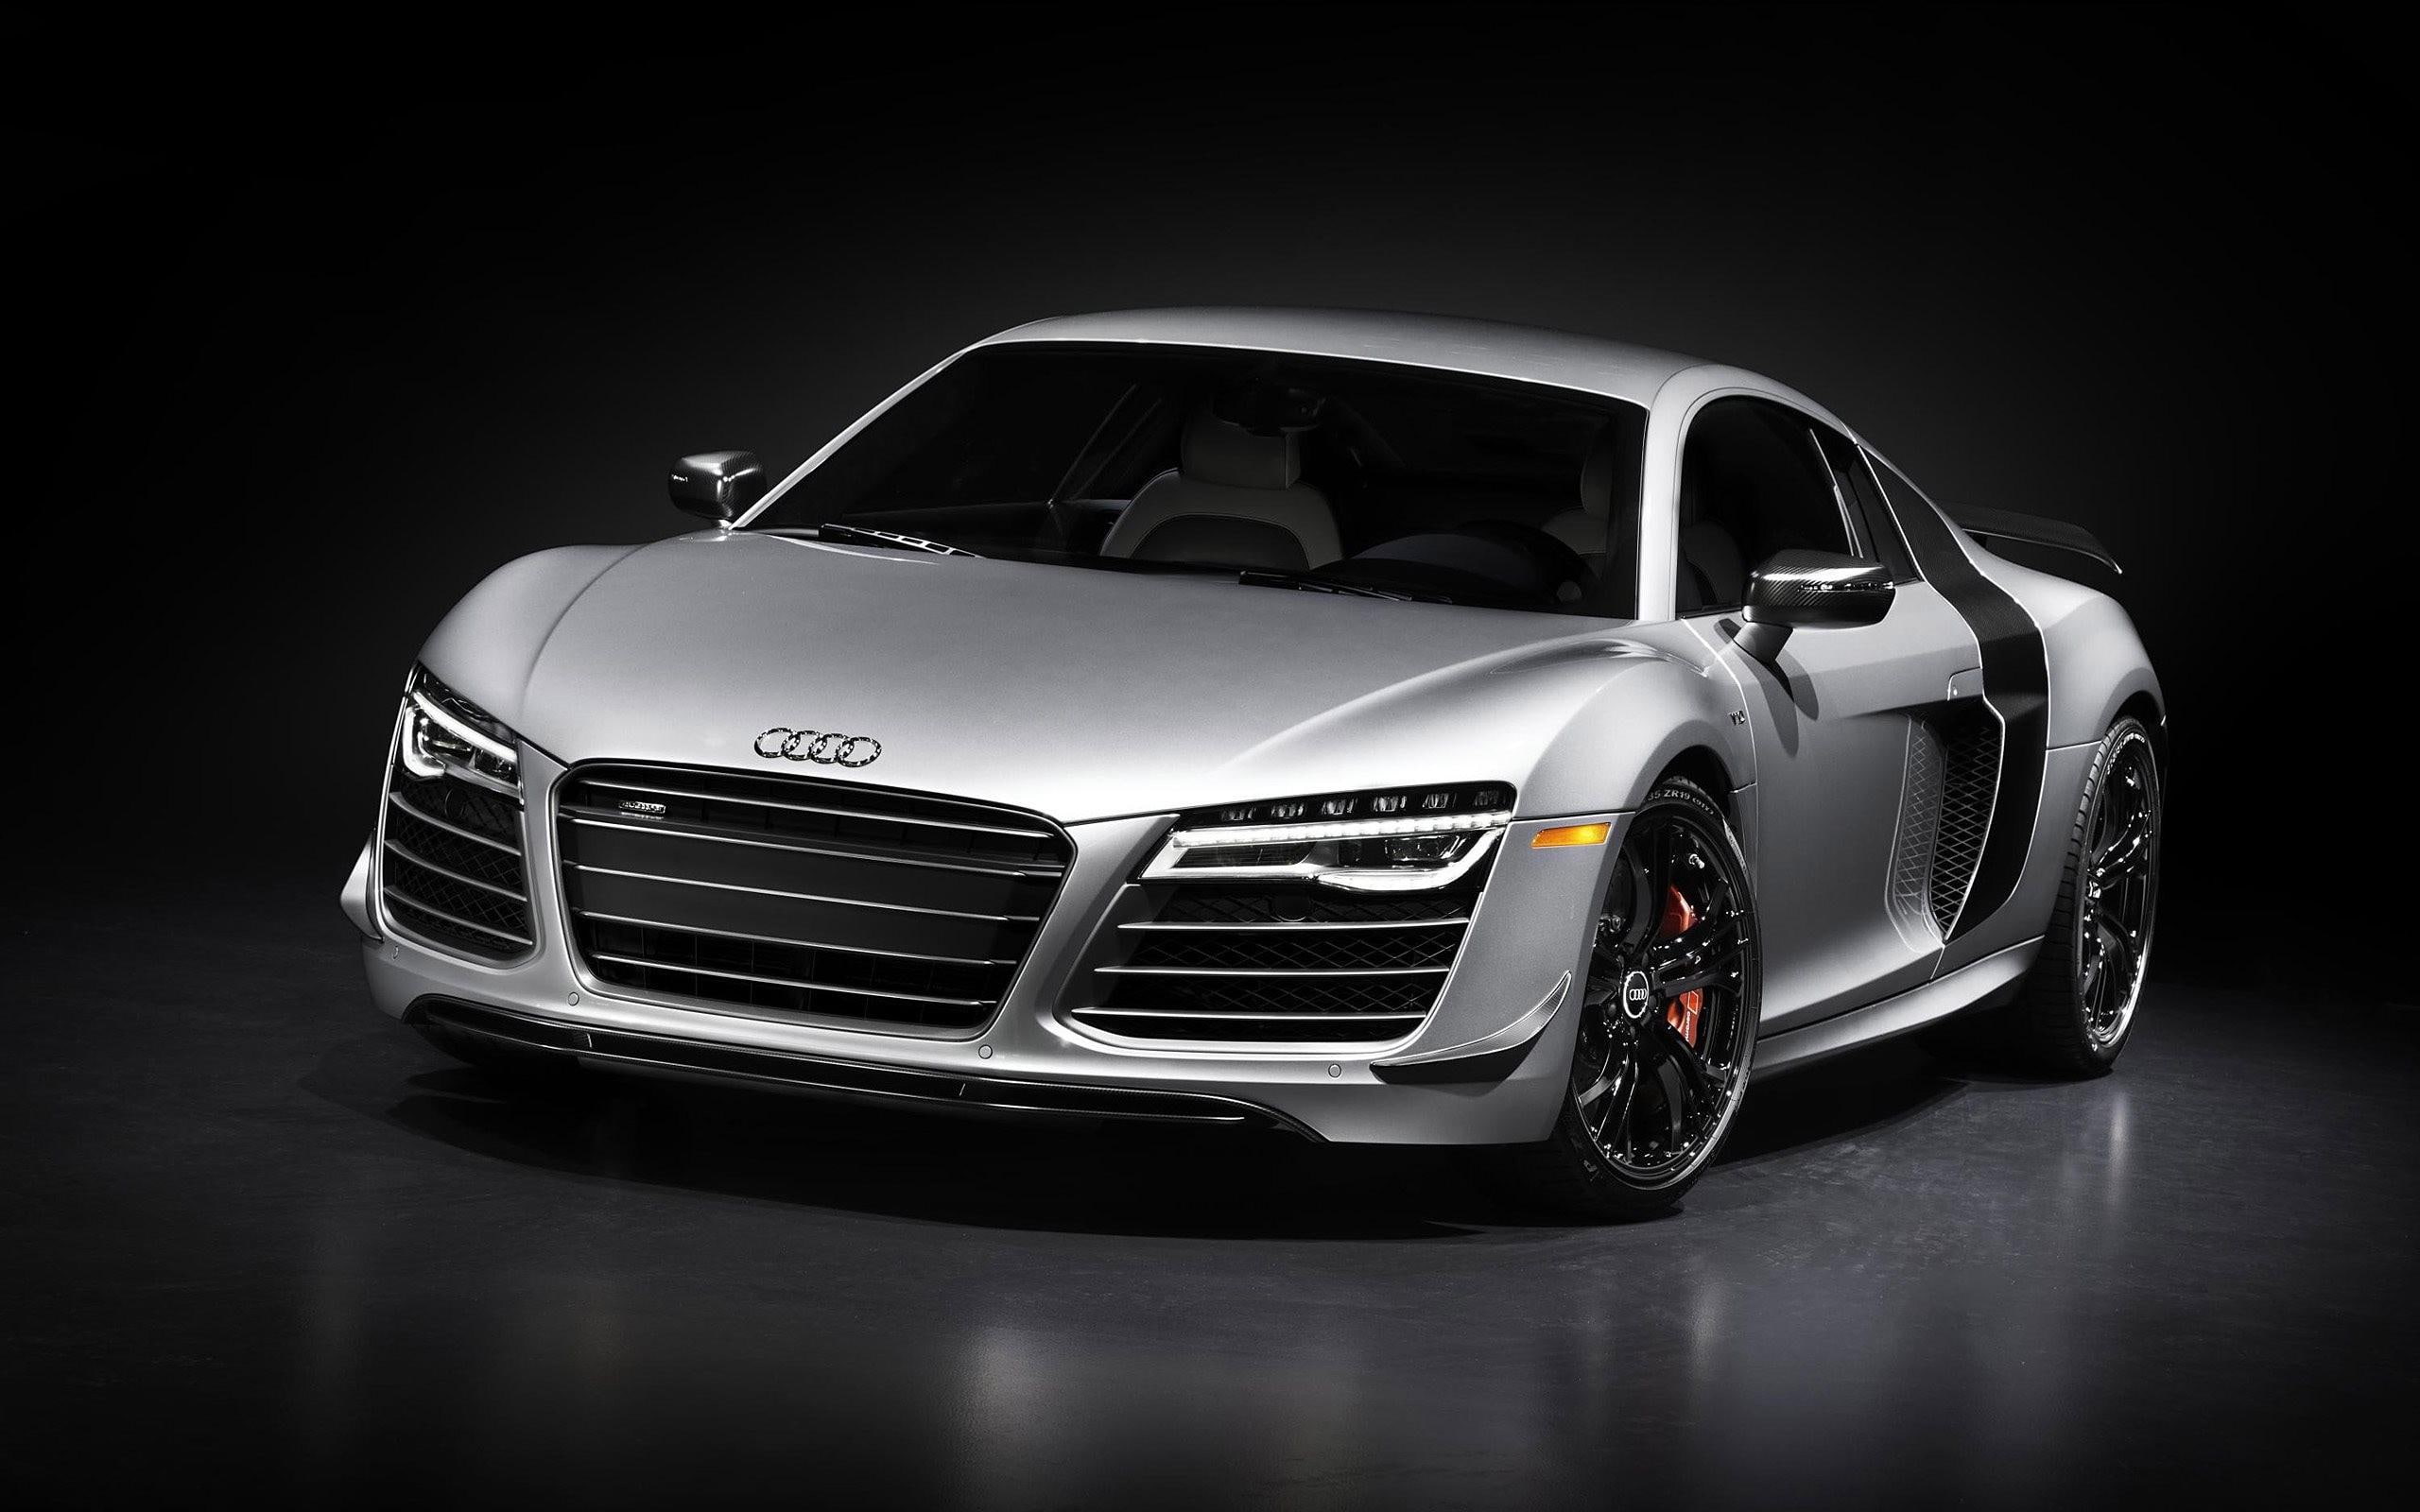 audi r8, silver, front view